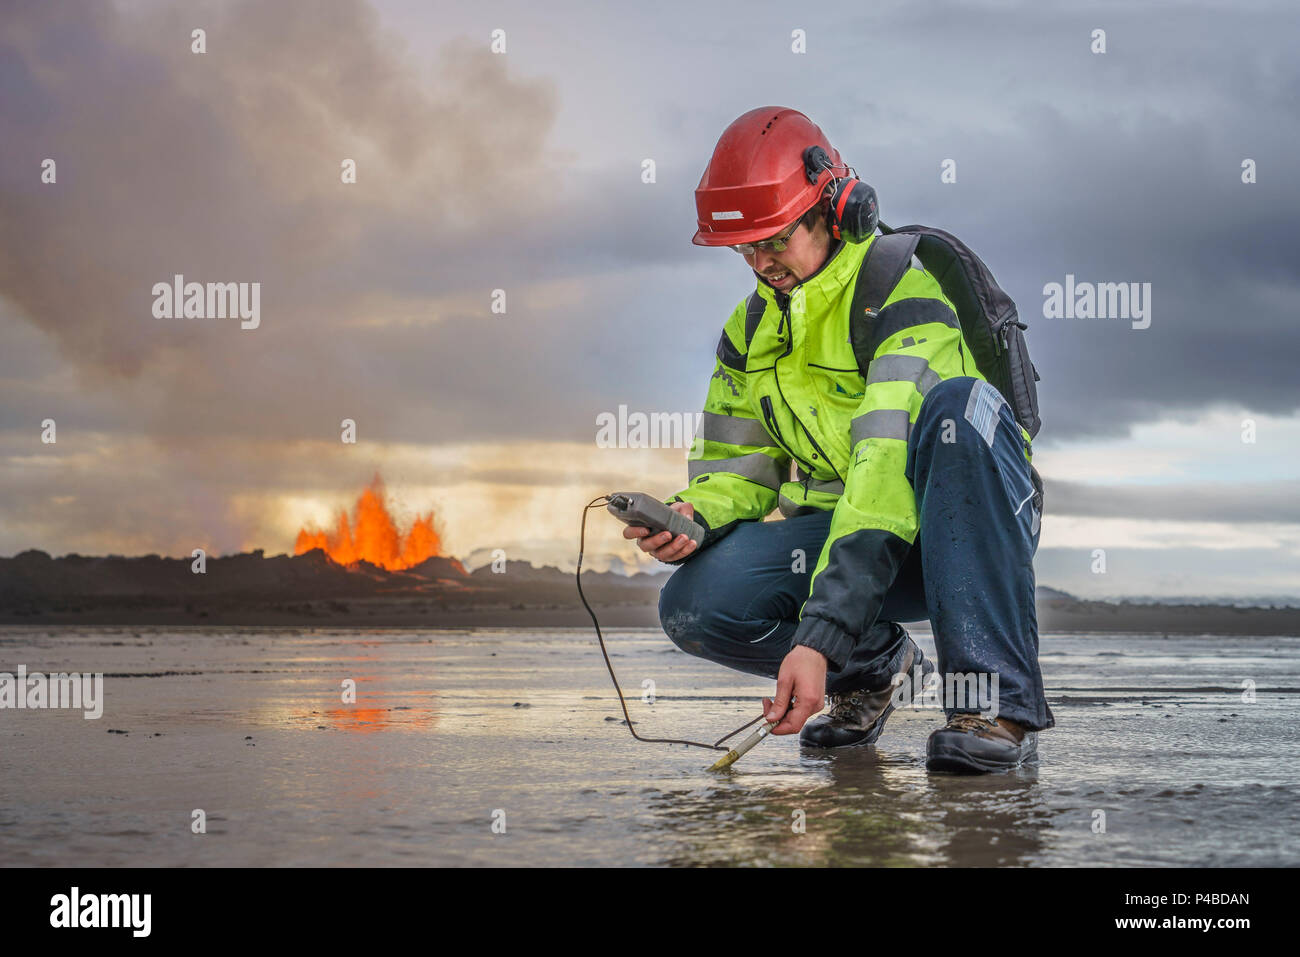 Scientist taking measurements by the eruption site at Holuhraun, near Bardabunga Volcano, Iceland. August 29, 2014 a fissure eruption started in Holuhraun at the northern end of a magma intrusion, which had moved progressively north, from the Bardarbunga volcano. Bardarbunga is a stratovolcano located under Vatnajokull, Iceland's most extensive glacier. Picture Date-Sept. 2, 2014 Stock Photo